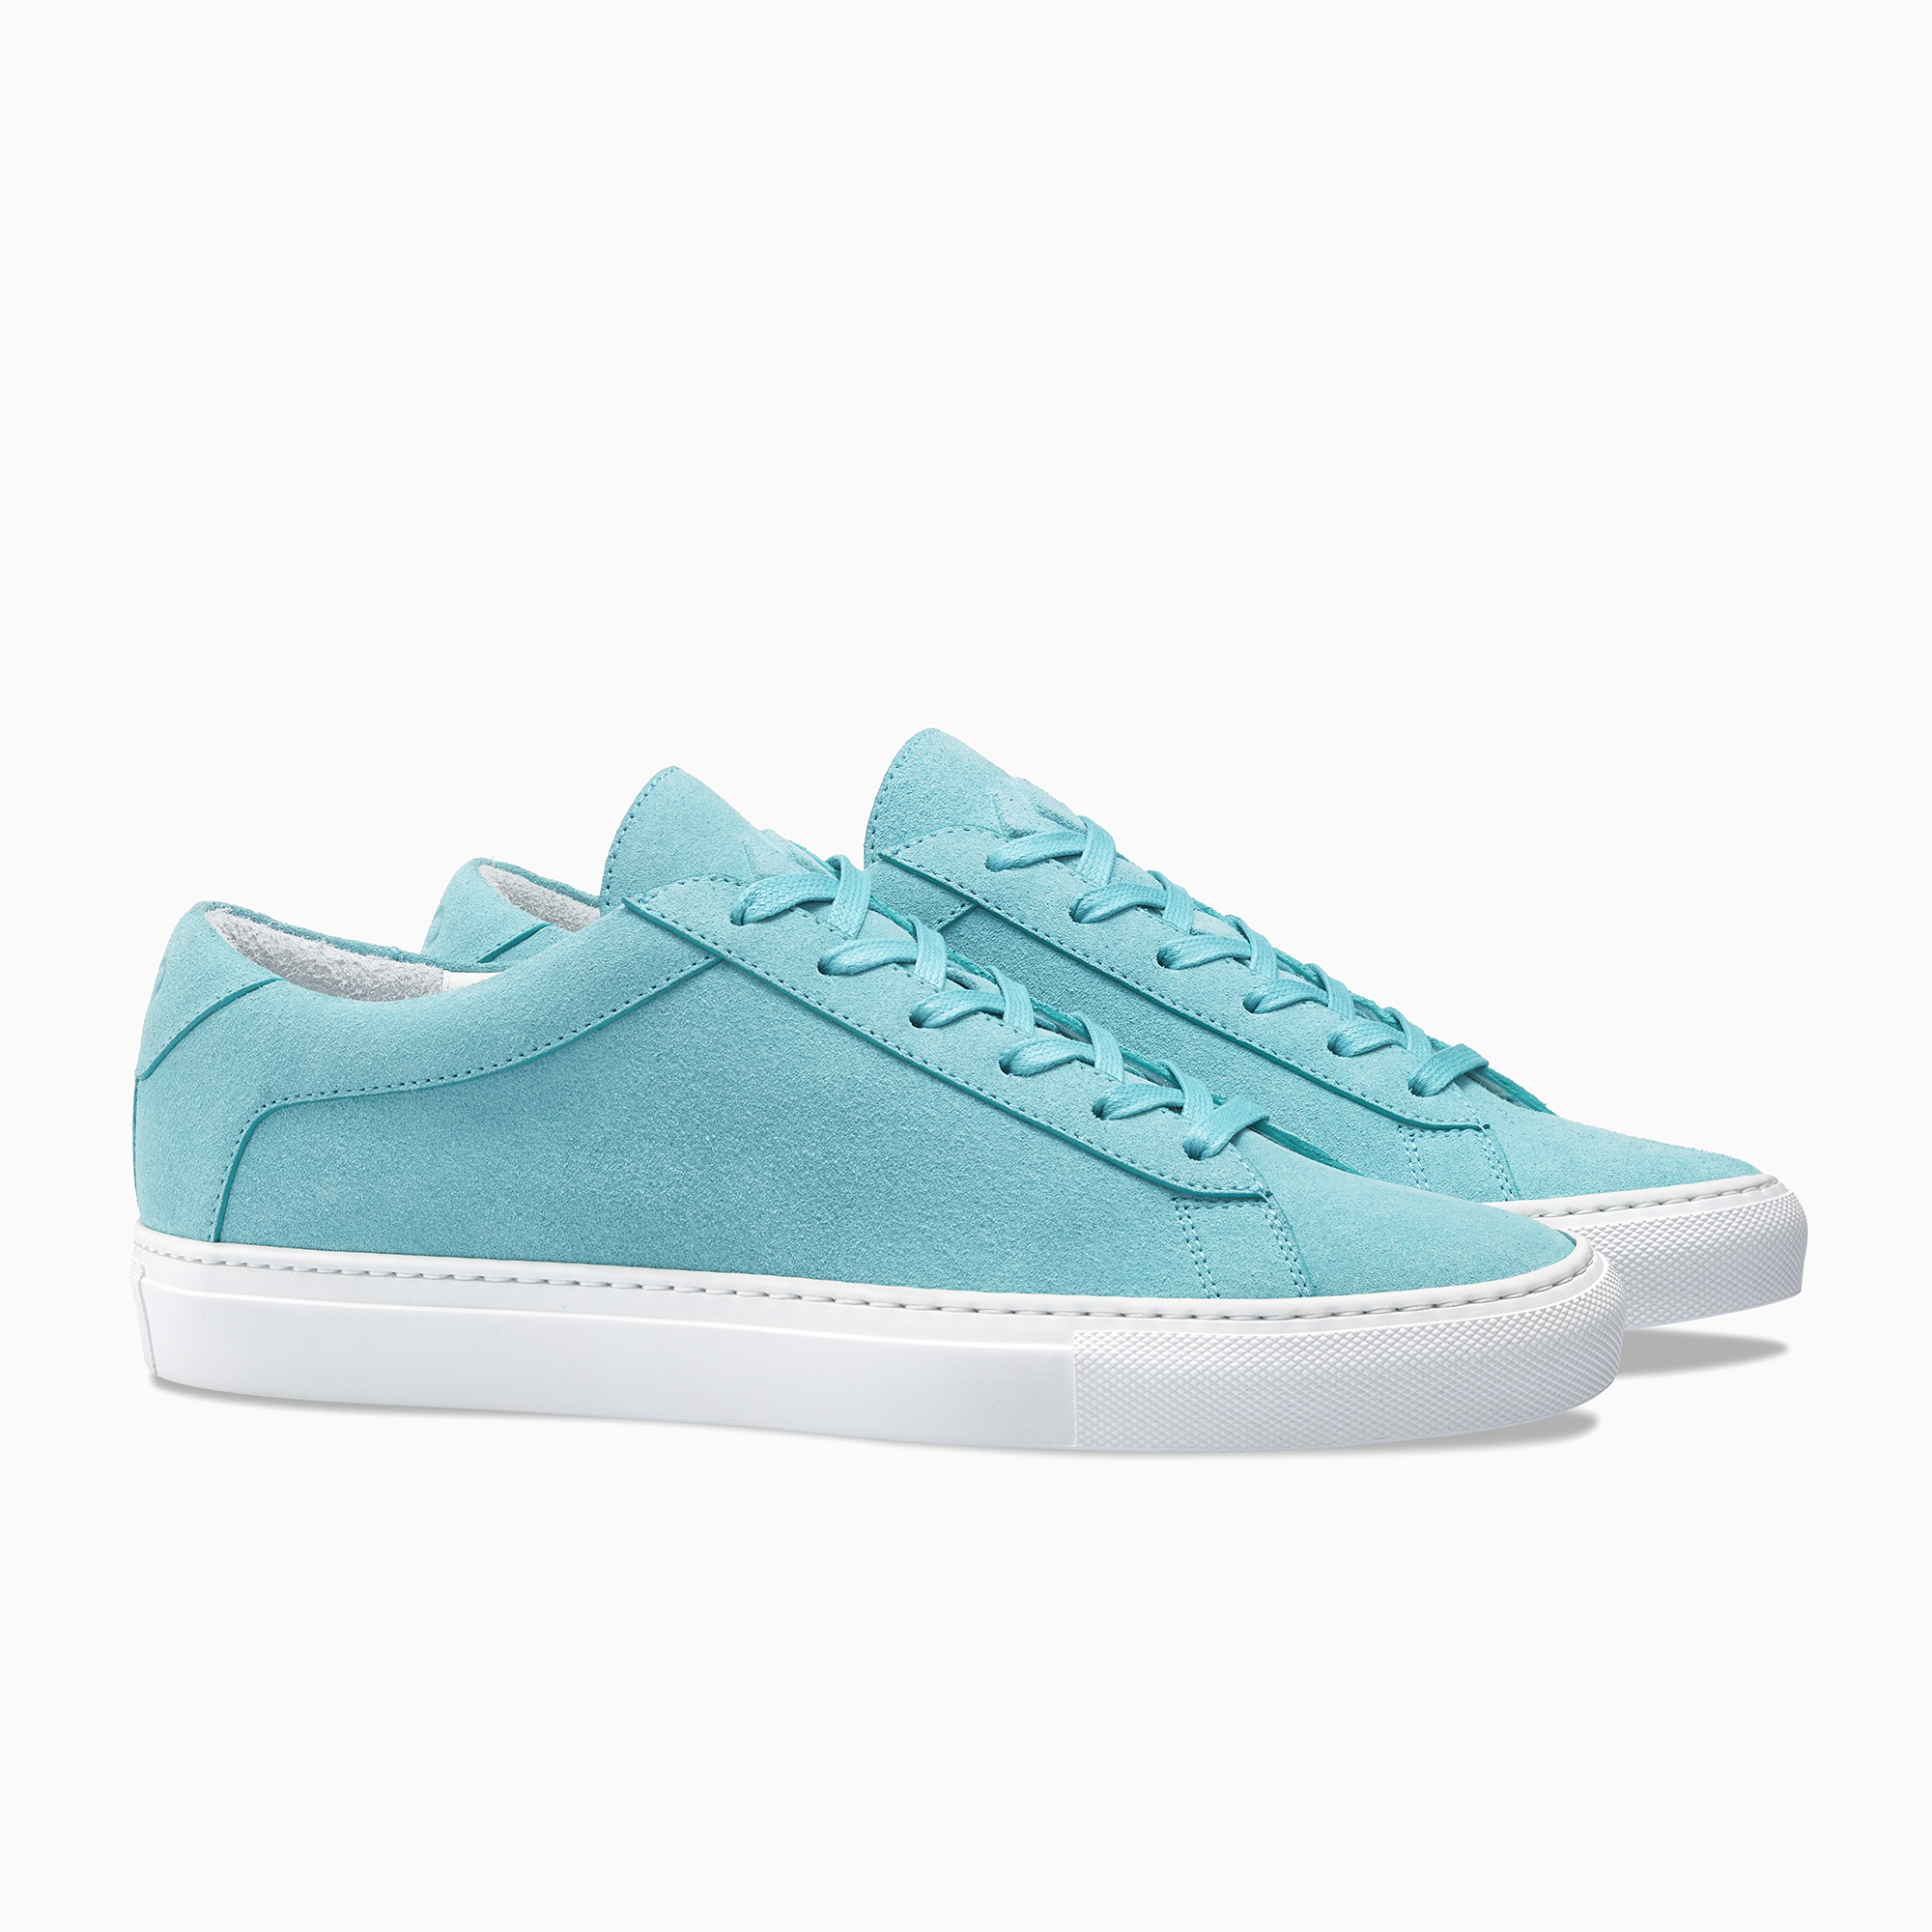 Light blue suede Low Top Sneaker white sole  Womens Koio basic